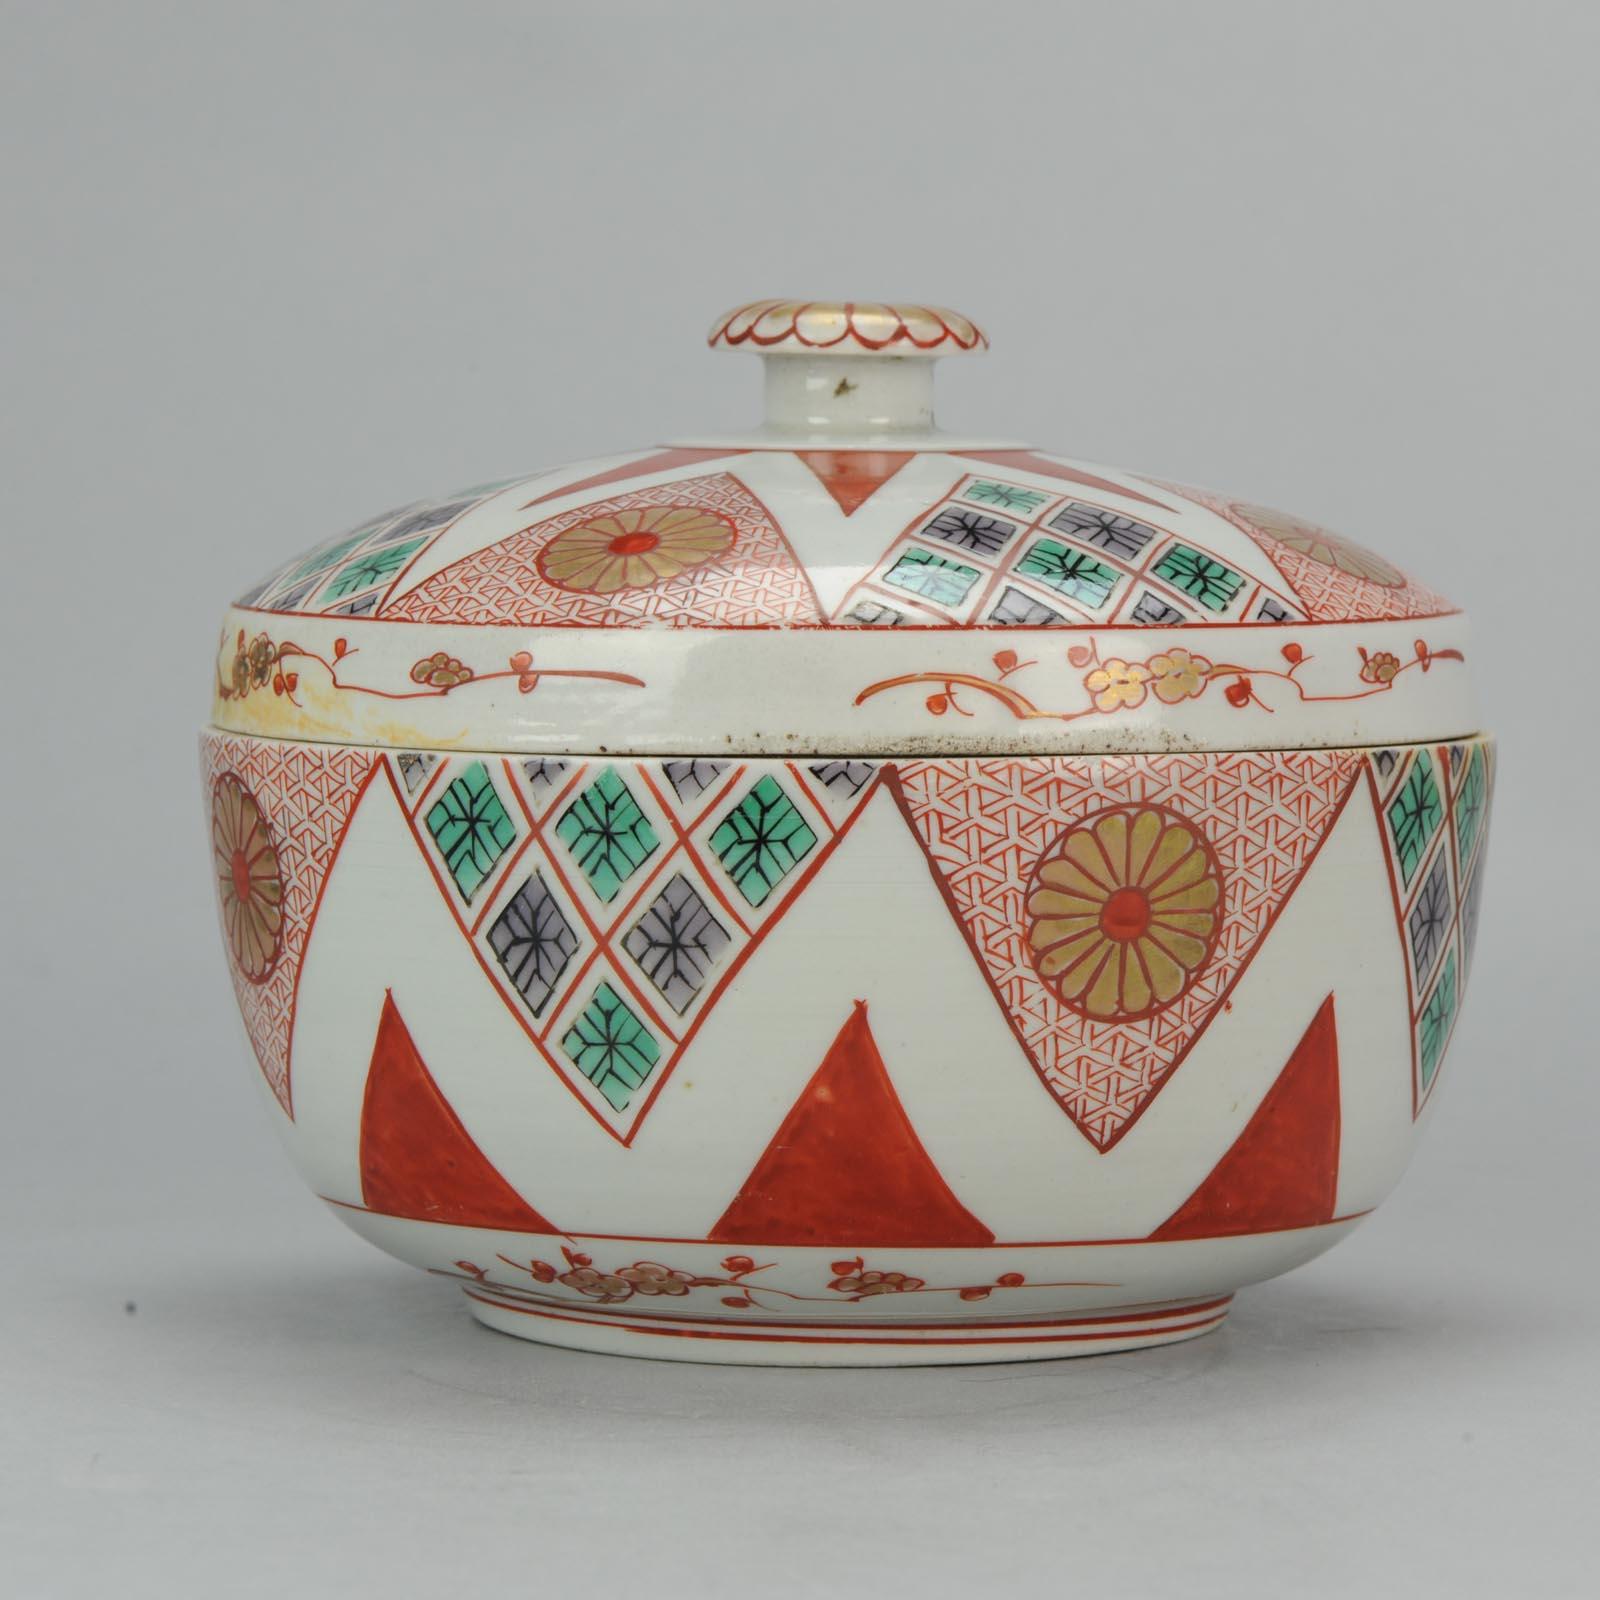 A very lovely and richly decorated Multicolored Lidded Bowl with Dish.

Additional information:
Material: Porcelain & Pottery
Color: Imari
Region of Origin: Japan
Period: 18th century
Age: Pre-1800
Original/Reproduction: Original
Condition: Overall